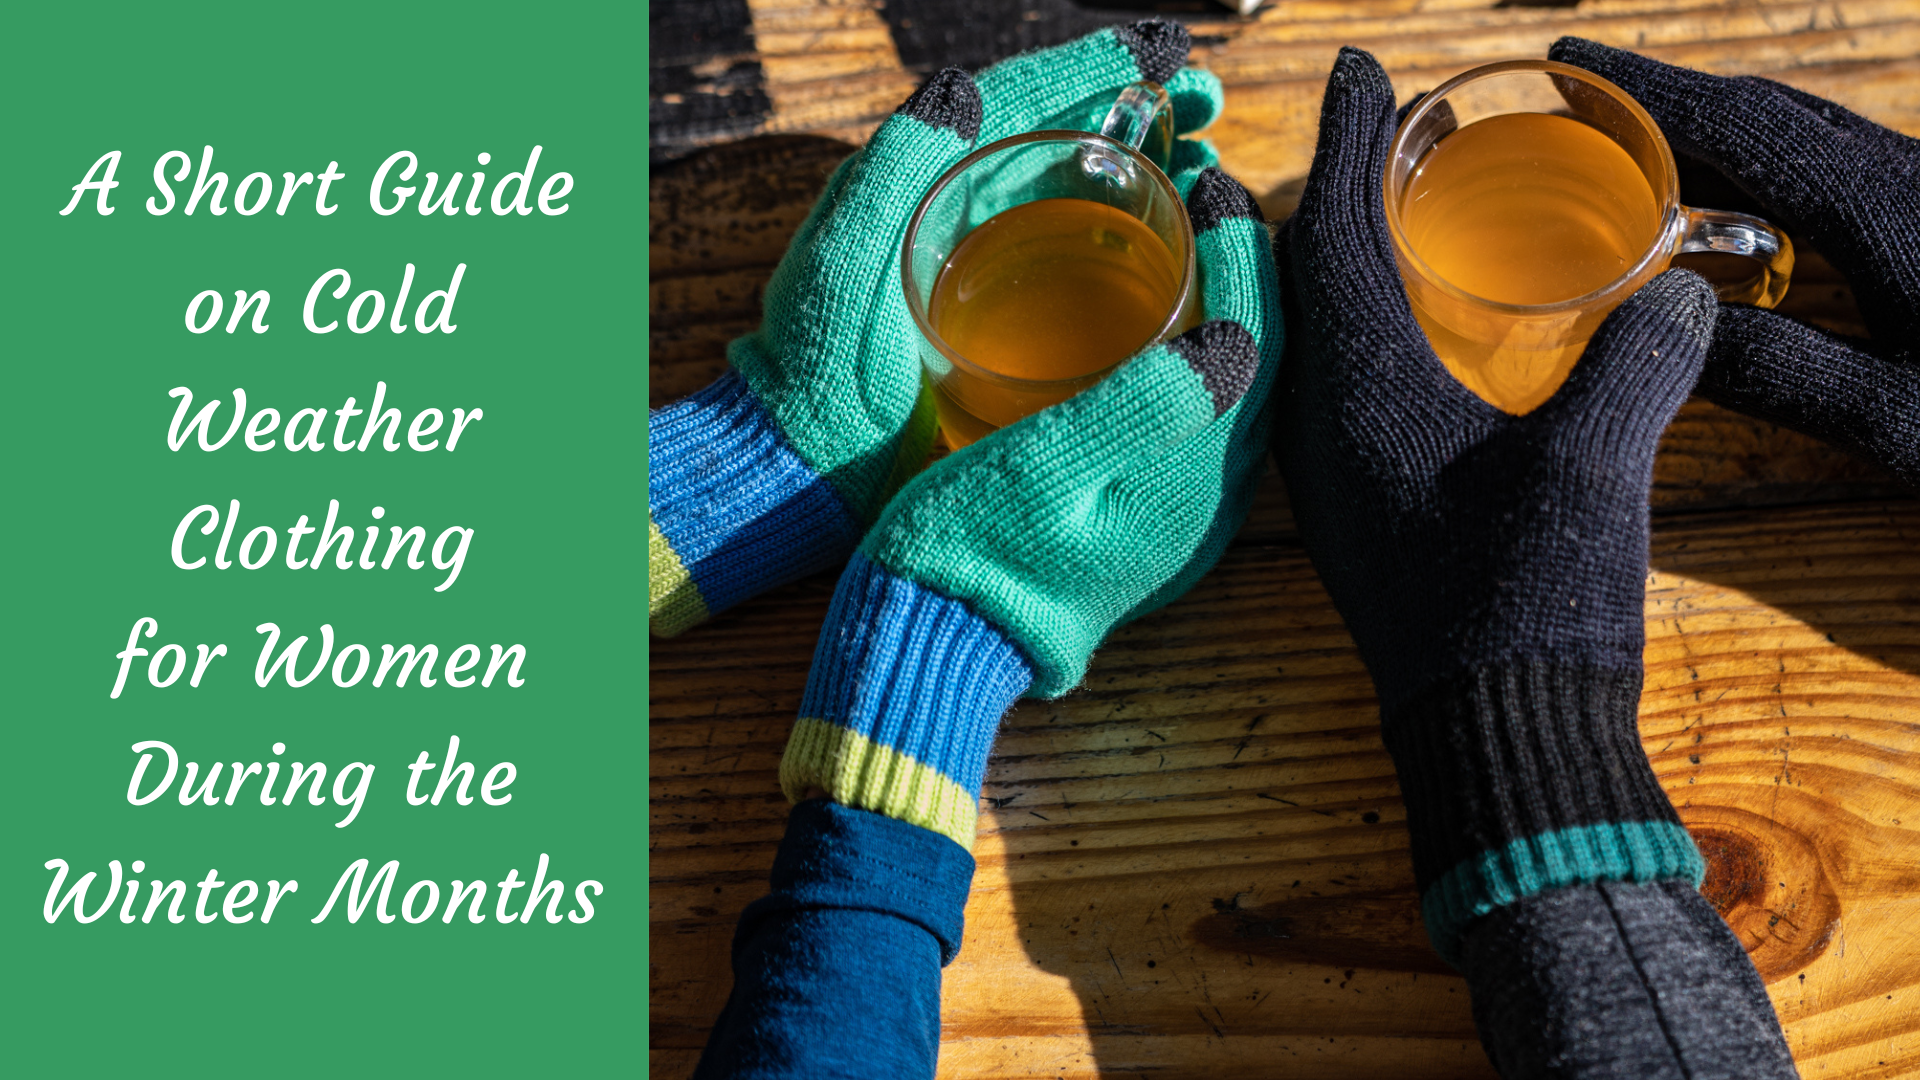 A Short Guide on Cold Weather Clothing for Women During the Winter Months -  The Kosha Journal